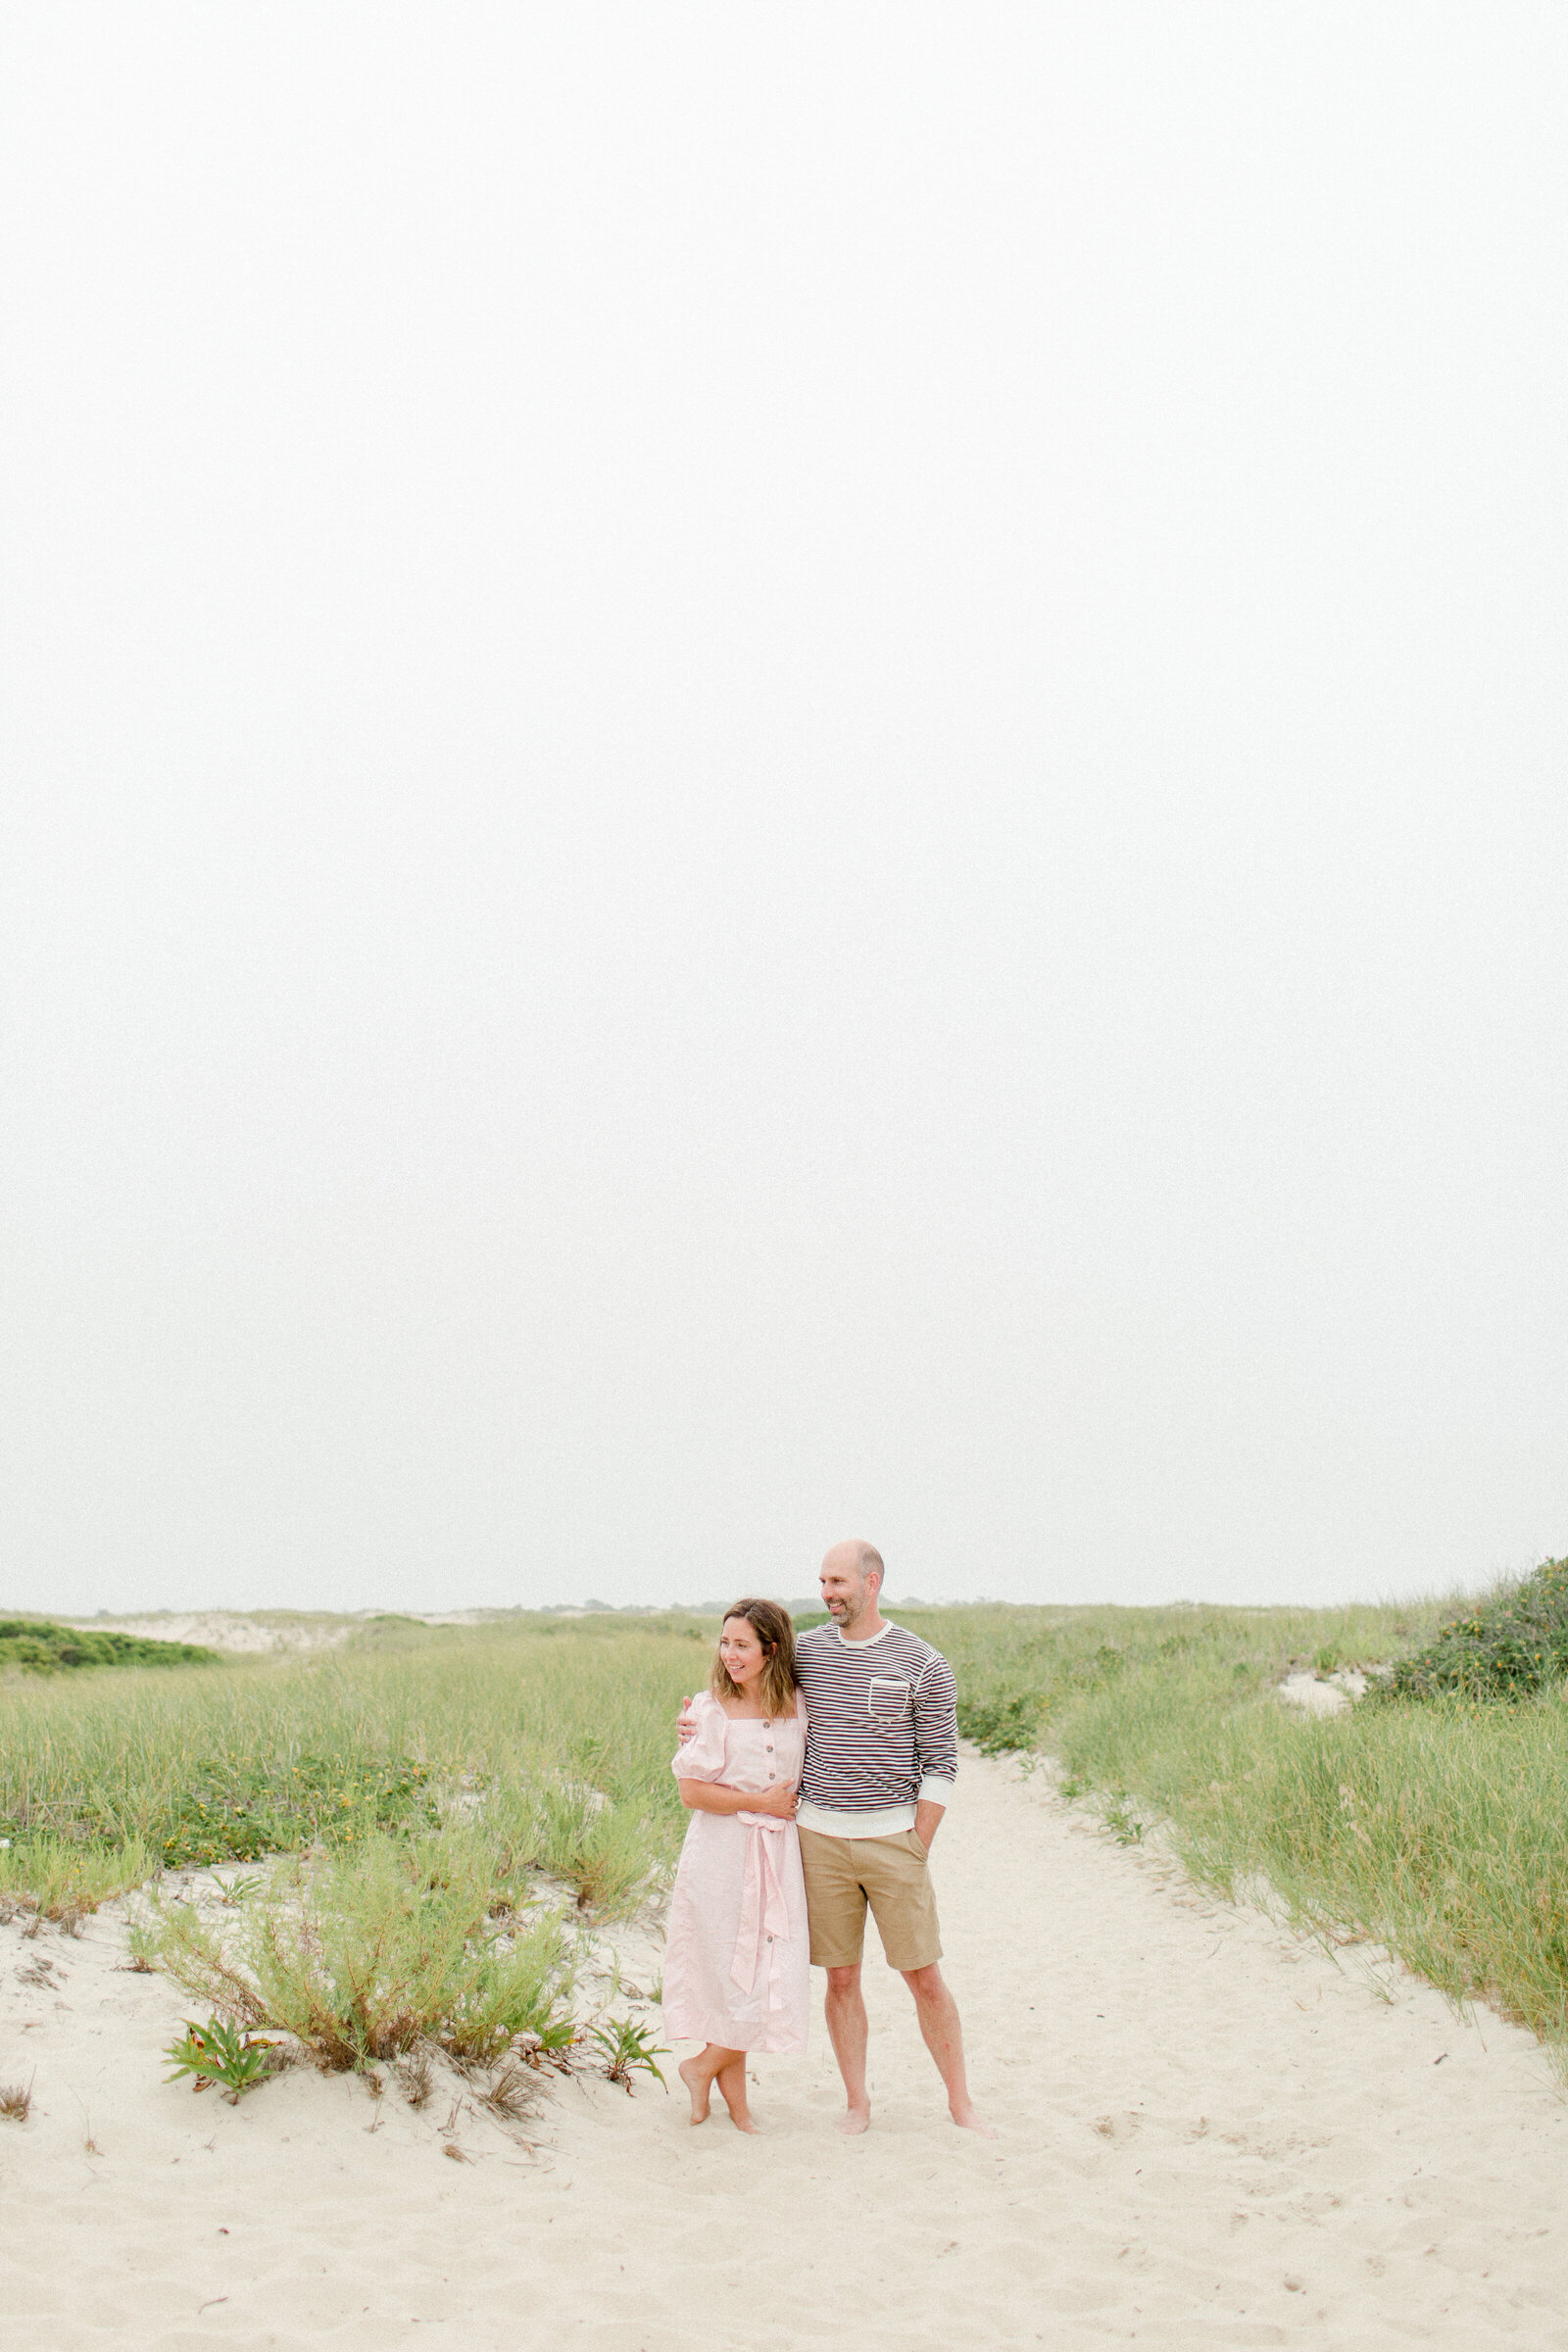 A husband and wife stand together on a sandy path at the beach while staring off to one side during photo session with Boston photographer Corinne Isabelle